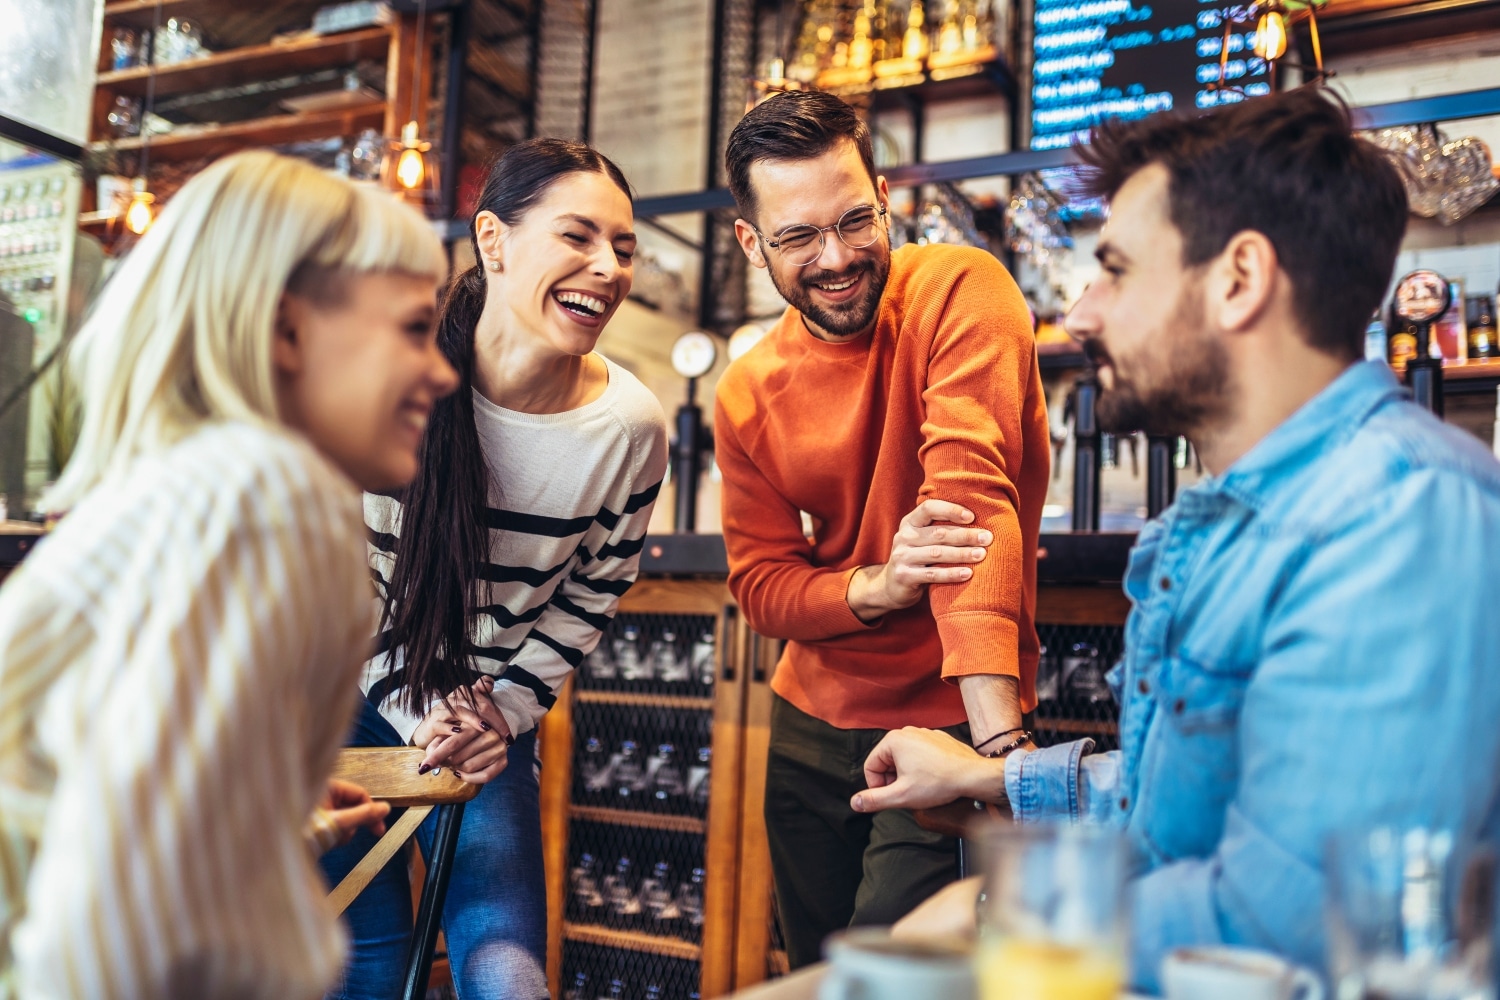 tips for navigating social situations when you’re newly sober